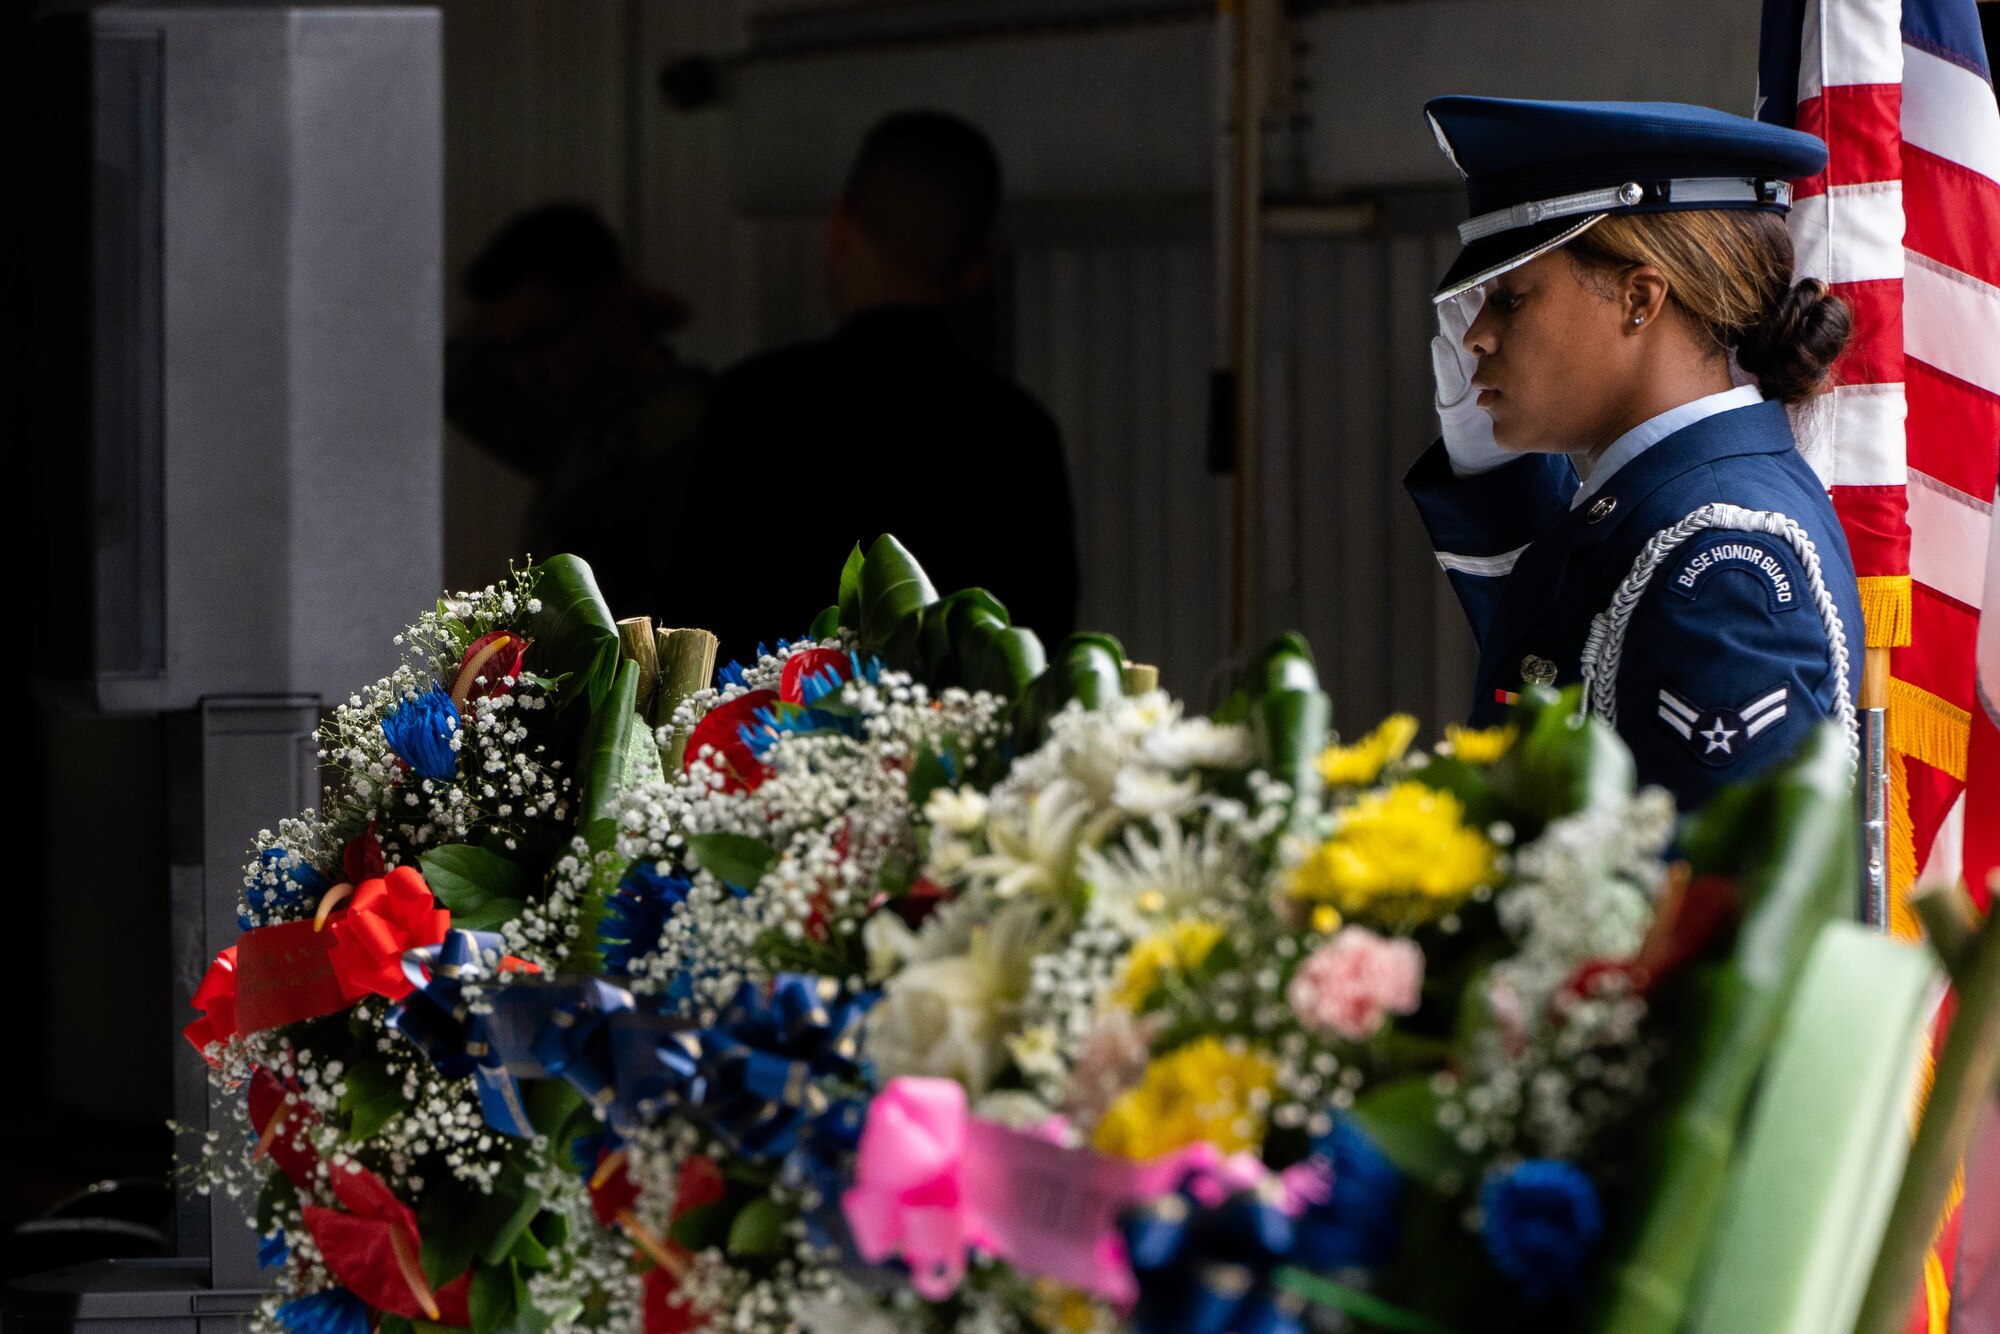 An Airman from the Base Honor Guard honors and salutes a wreath during the December 7th Remembrance Ceremony at Joint Base Pearl Harbor-Hickam, Hawaii, Dec. 7, 2021. The attacks on seven bases around the island of Oahu precipitated America’s entry into World War II. The annual December 7th Remembrance Ceremony fostered reflection and commemoration for those affected by the attacks 80 years ago. (U.S. Air Force photo by Airman 1st Class Makensie Cooper)